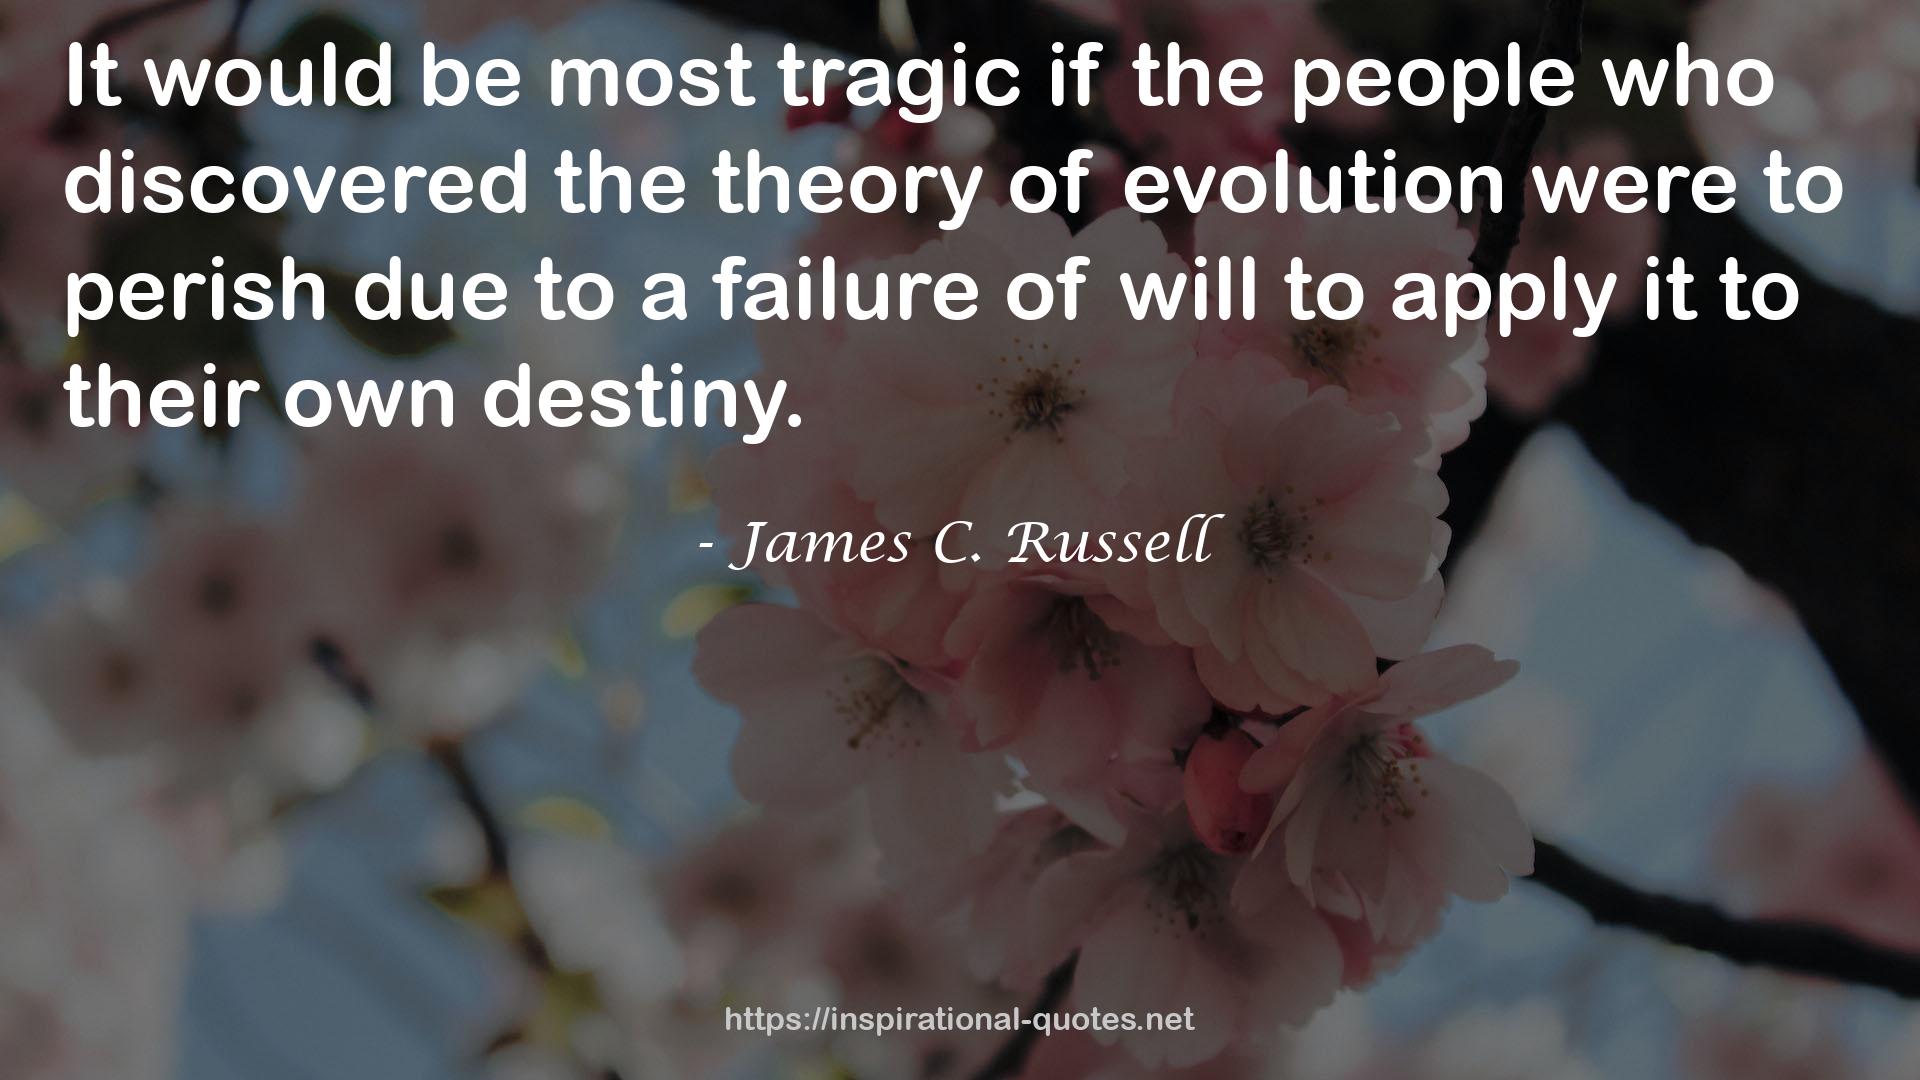 James C. Russell QUOTES